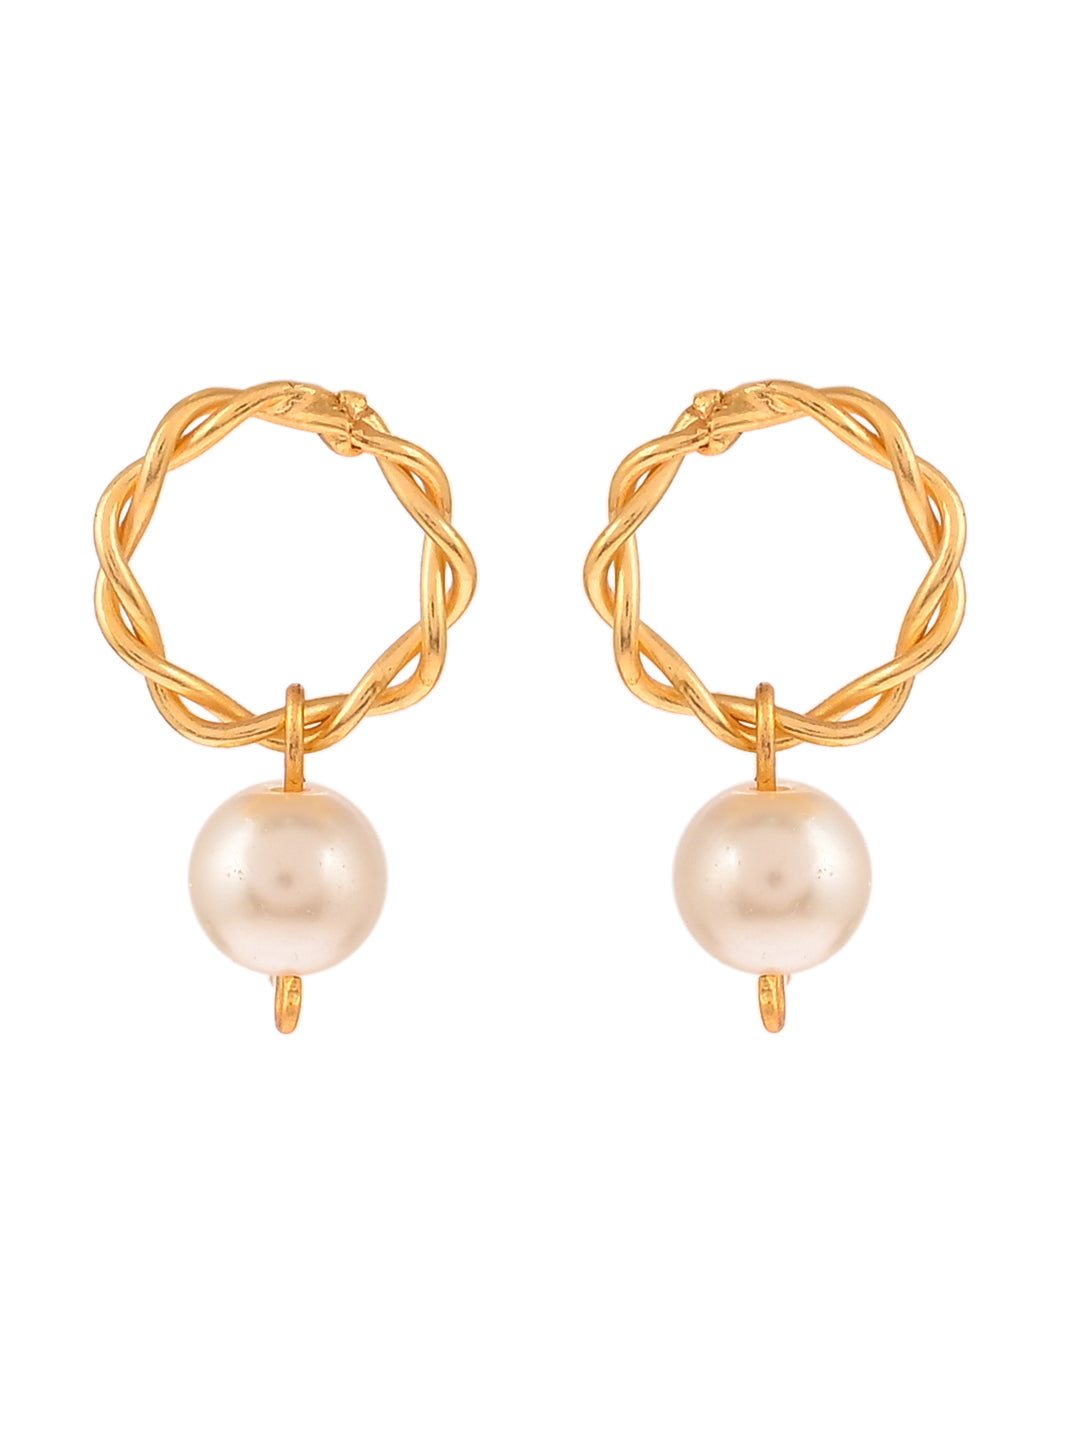 Gold Plated Contemporary Drop Earrings